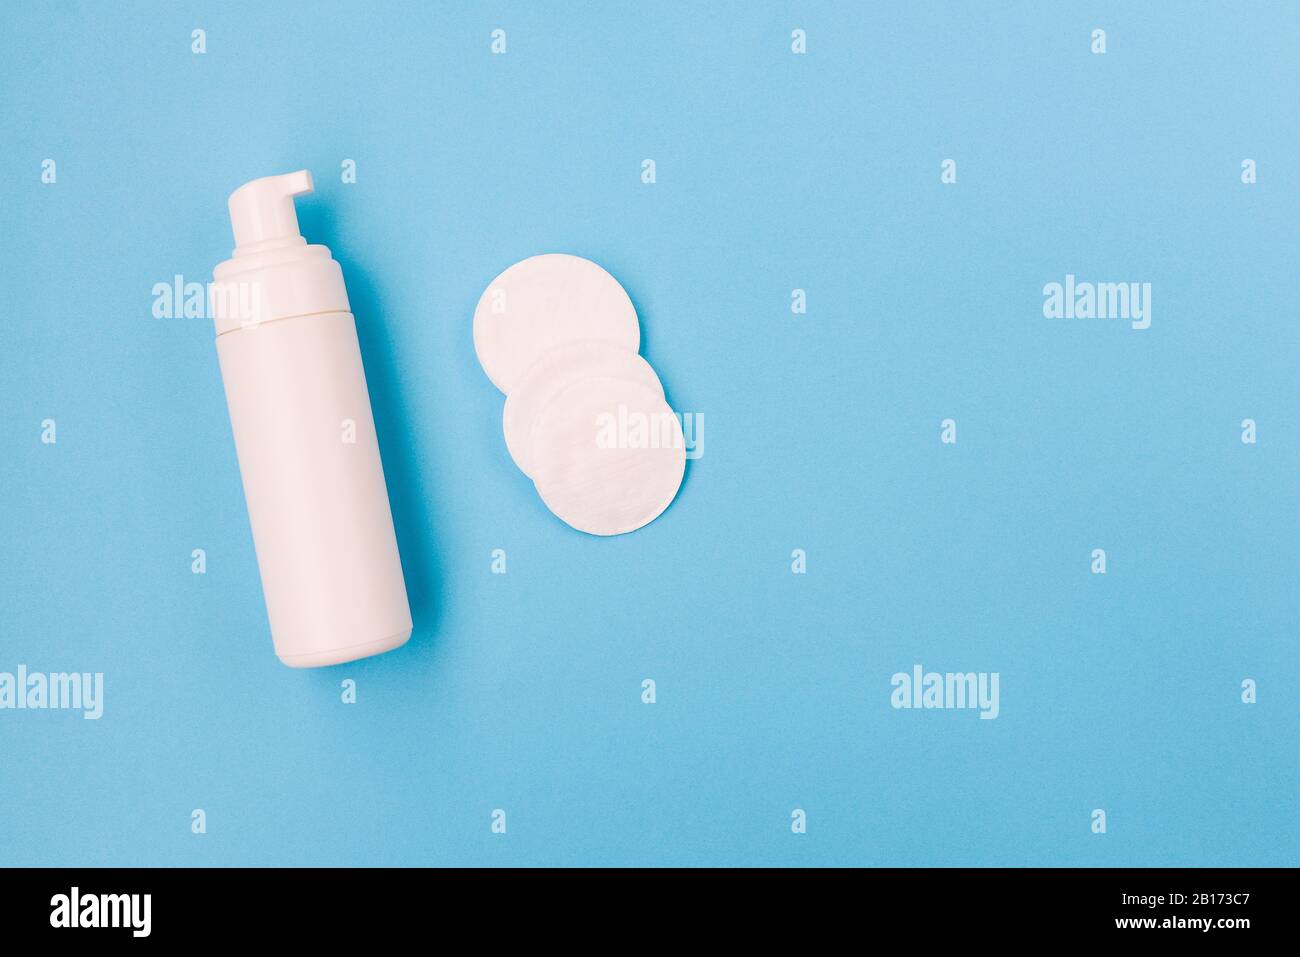 Foam for face and cotton pads. Face and body care. Cosmetic products on a blue background. Female and male beauty Stock Photo